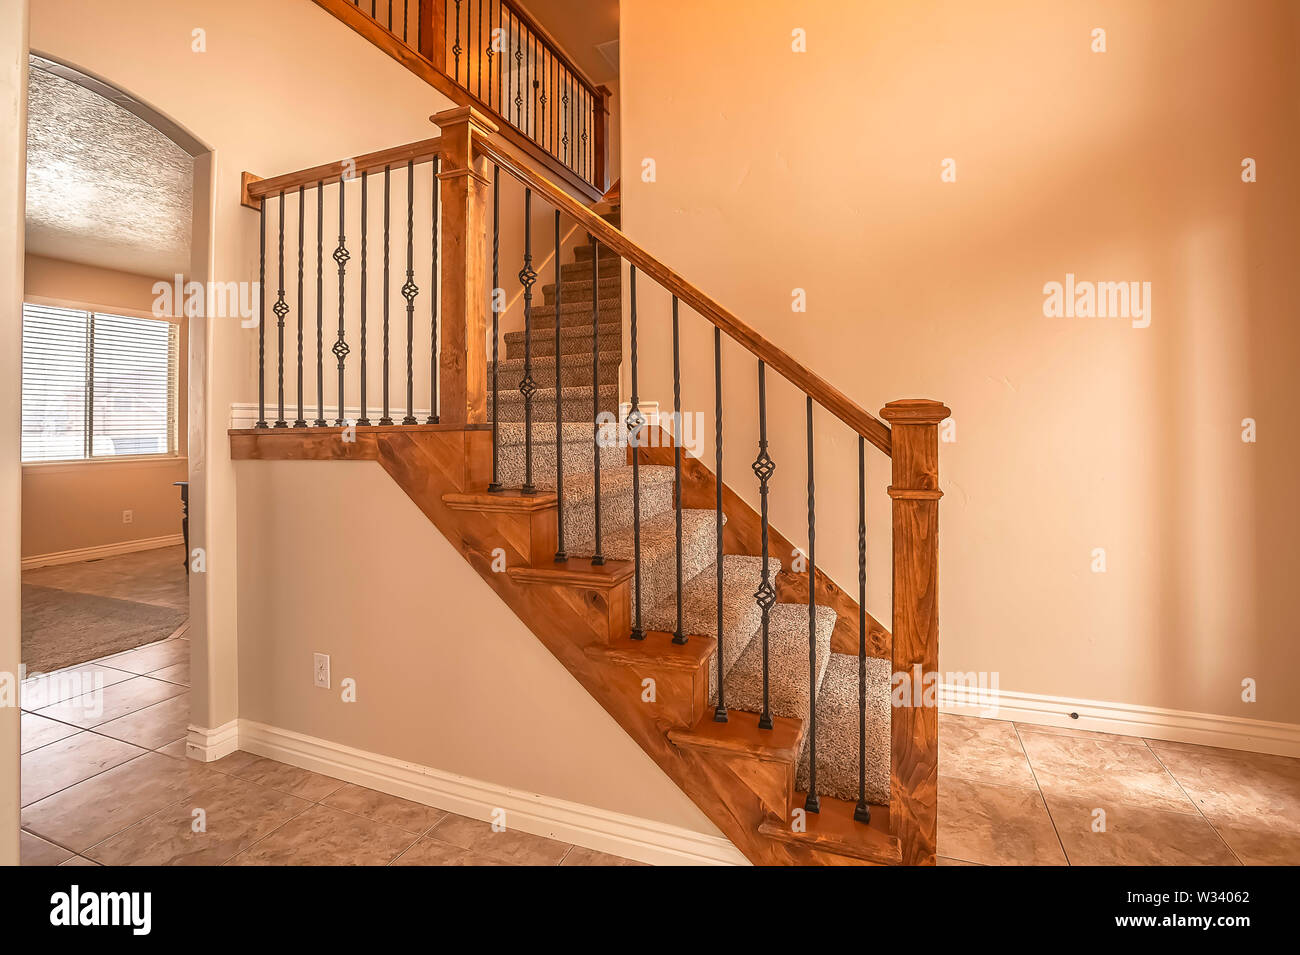 Carpeted Stairs With Wood Handrail And Metal Railing Inside